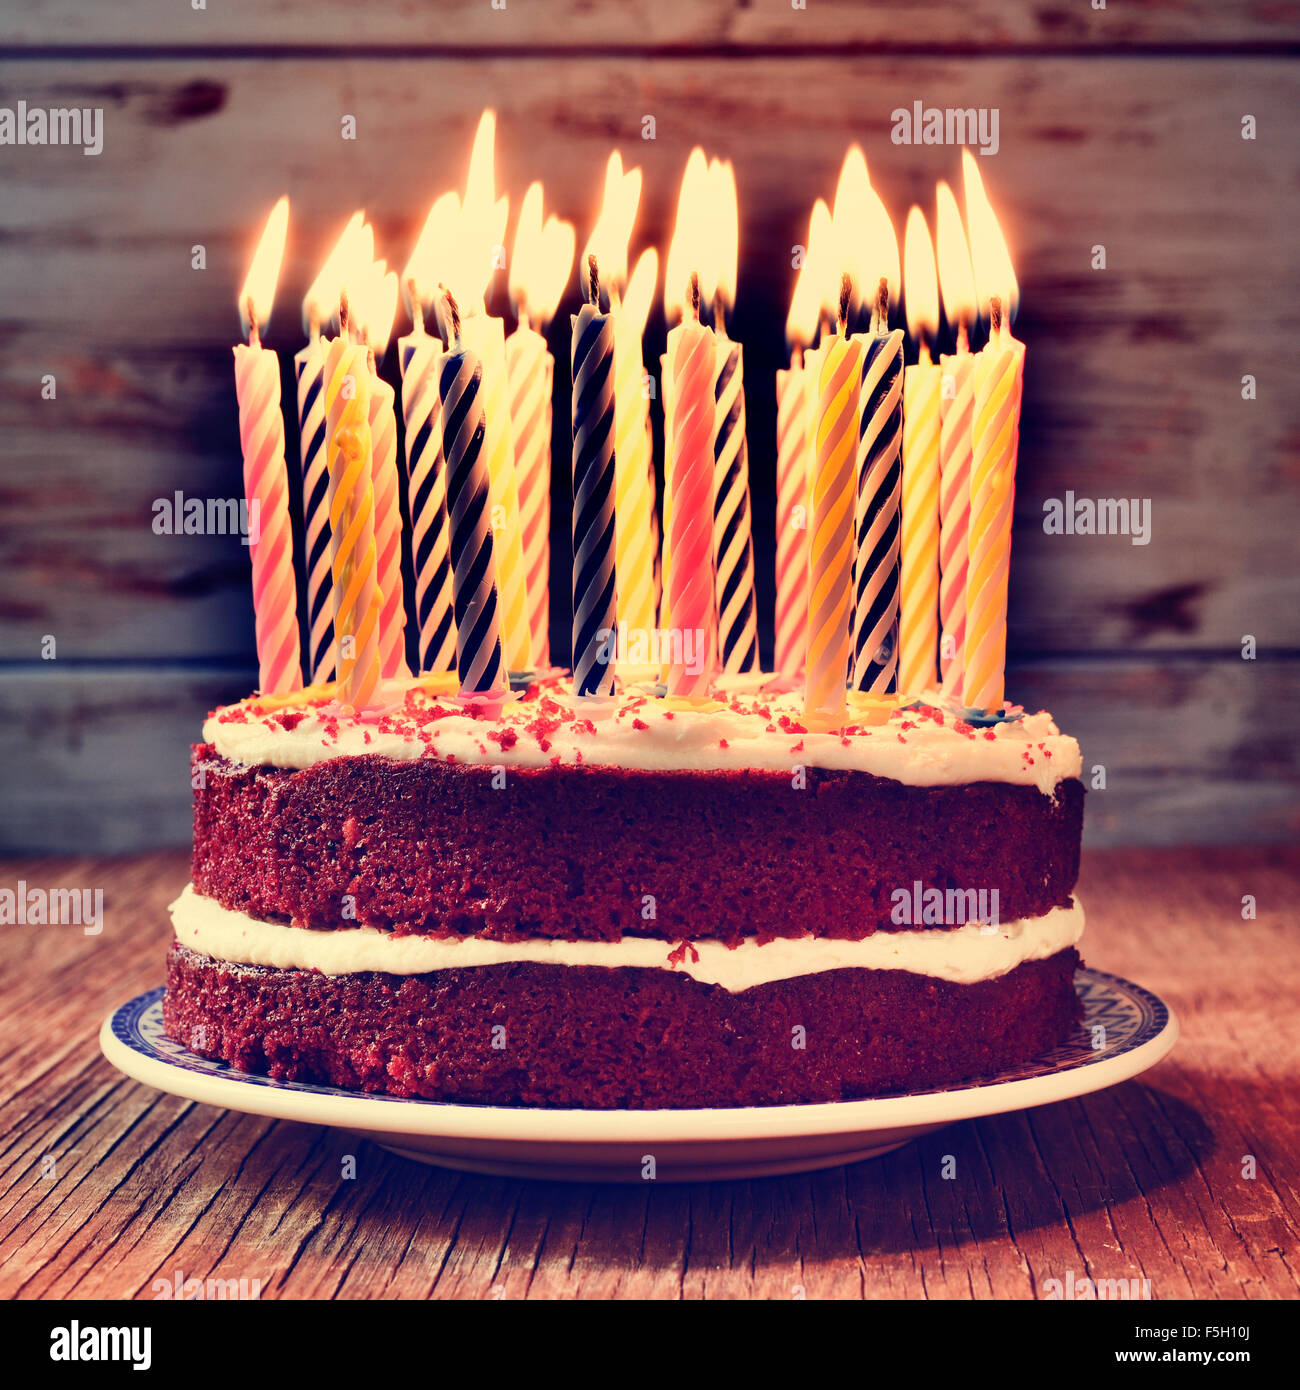 a cake topped with some lit candles before blowing out the cake, on a rustic wooden table, with a filtered effect Stock Photo